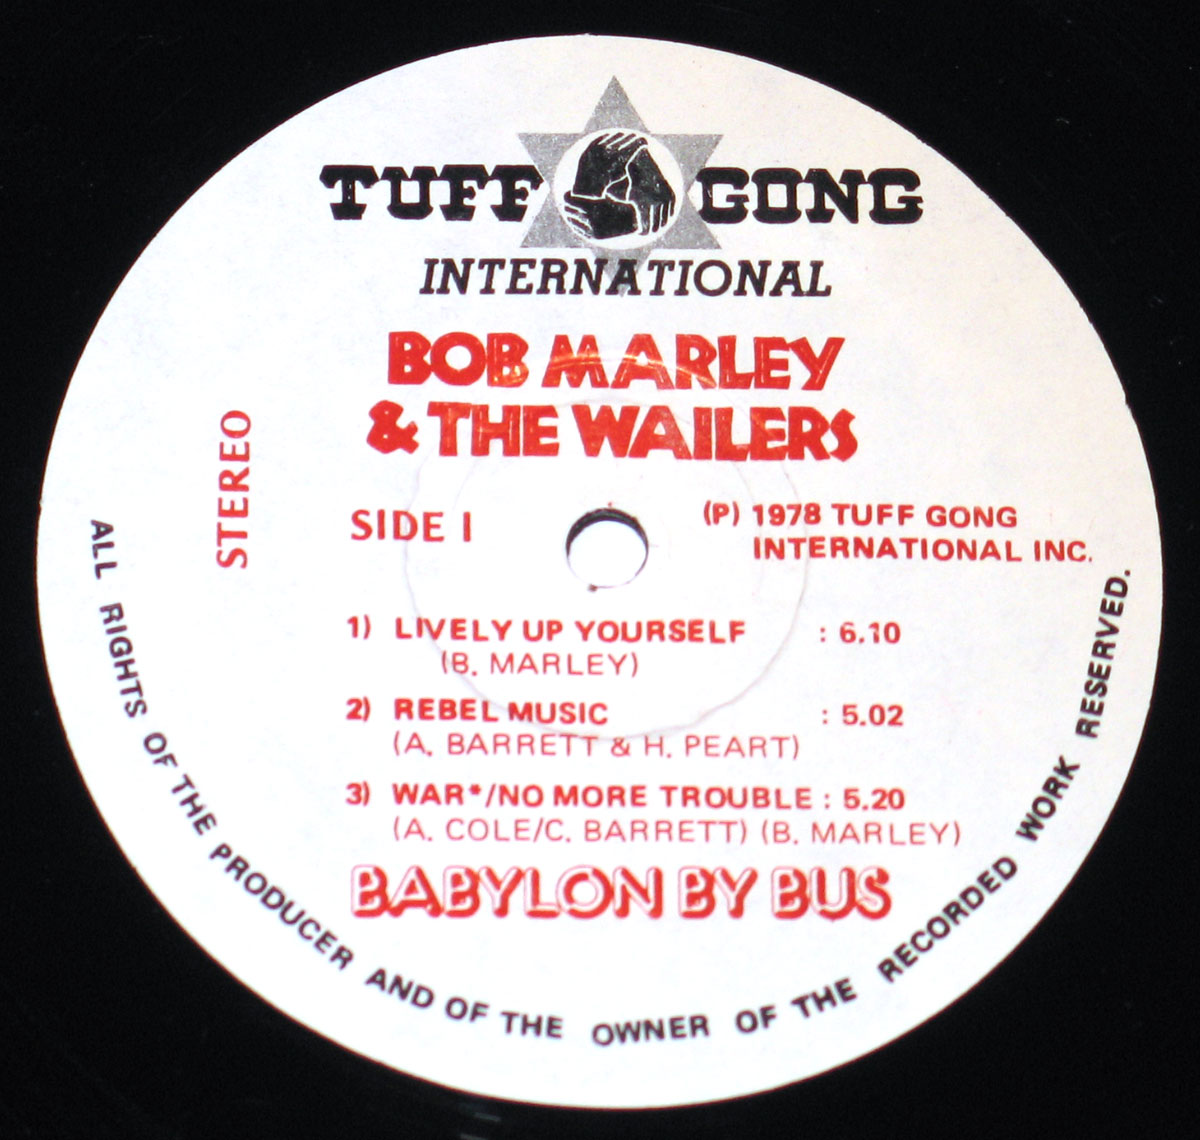 High Resolution Photo of Record Label